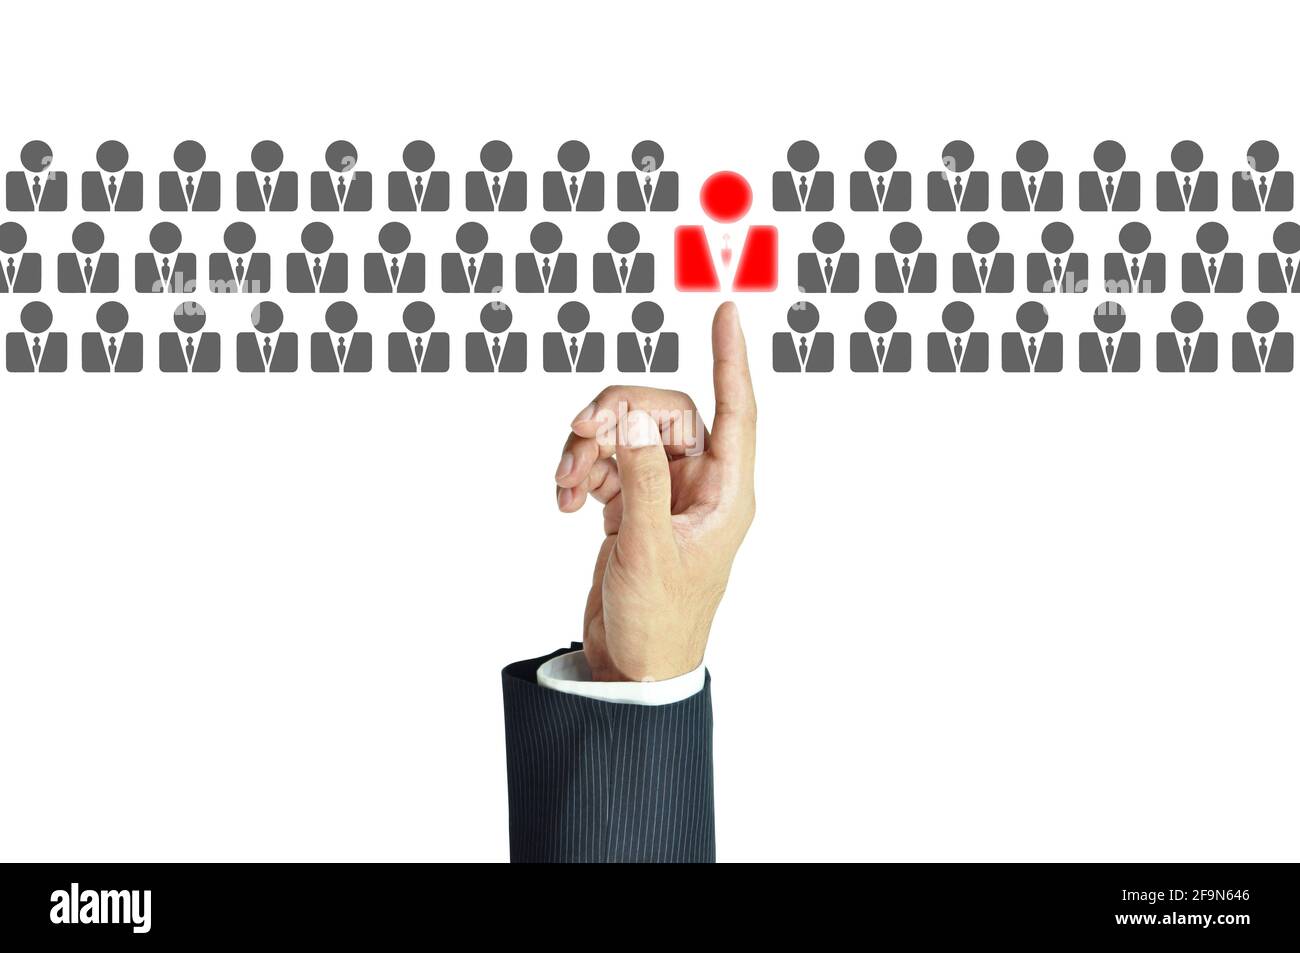 Businessman hand pointing on red human icon - stand out from the crowd, HR and HRM concepts Stock Photo